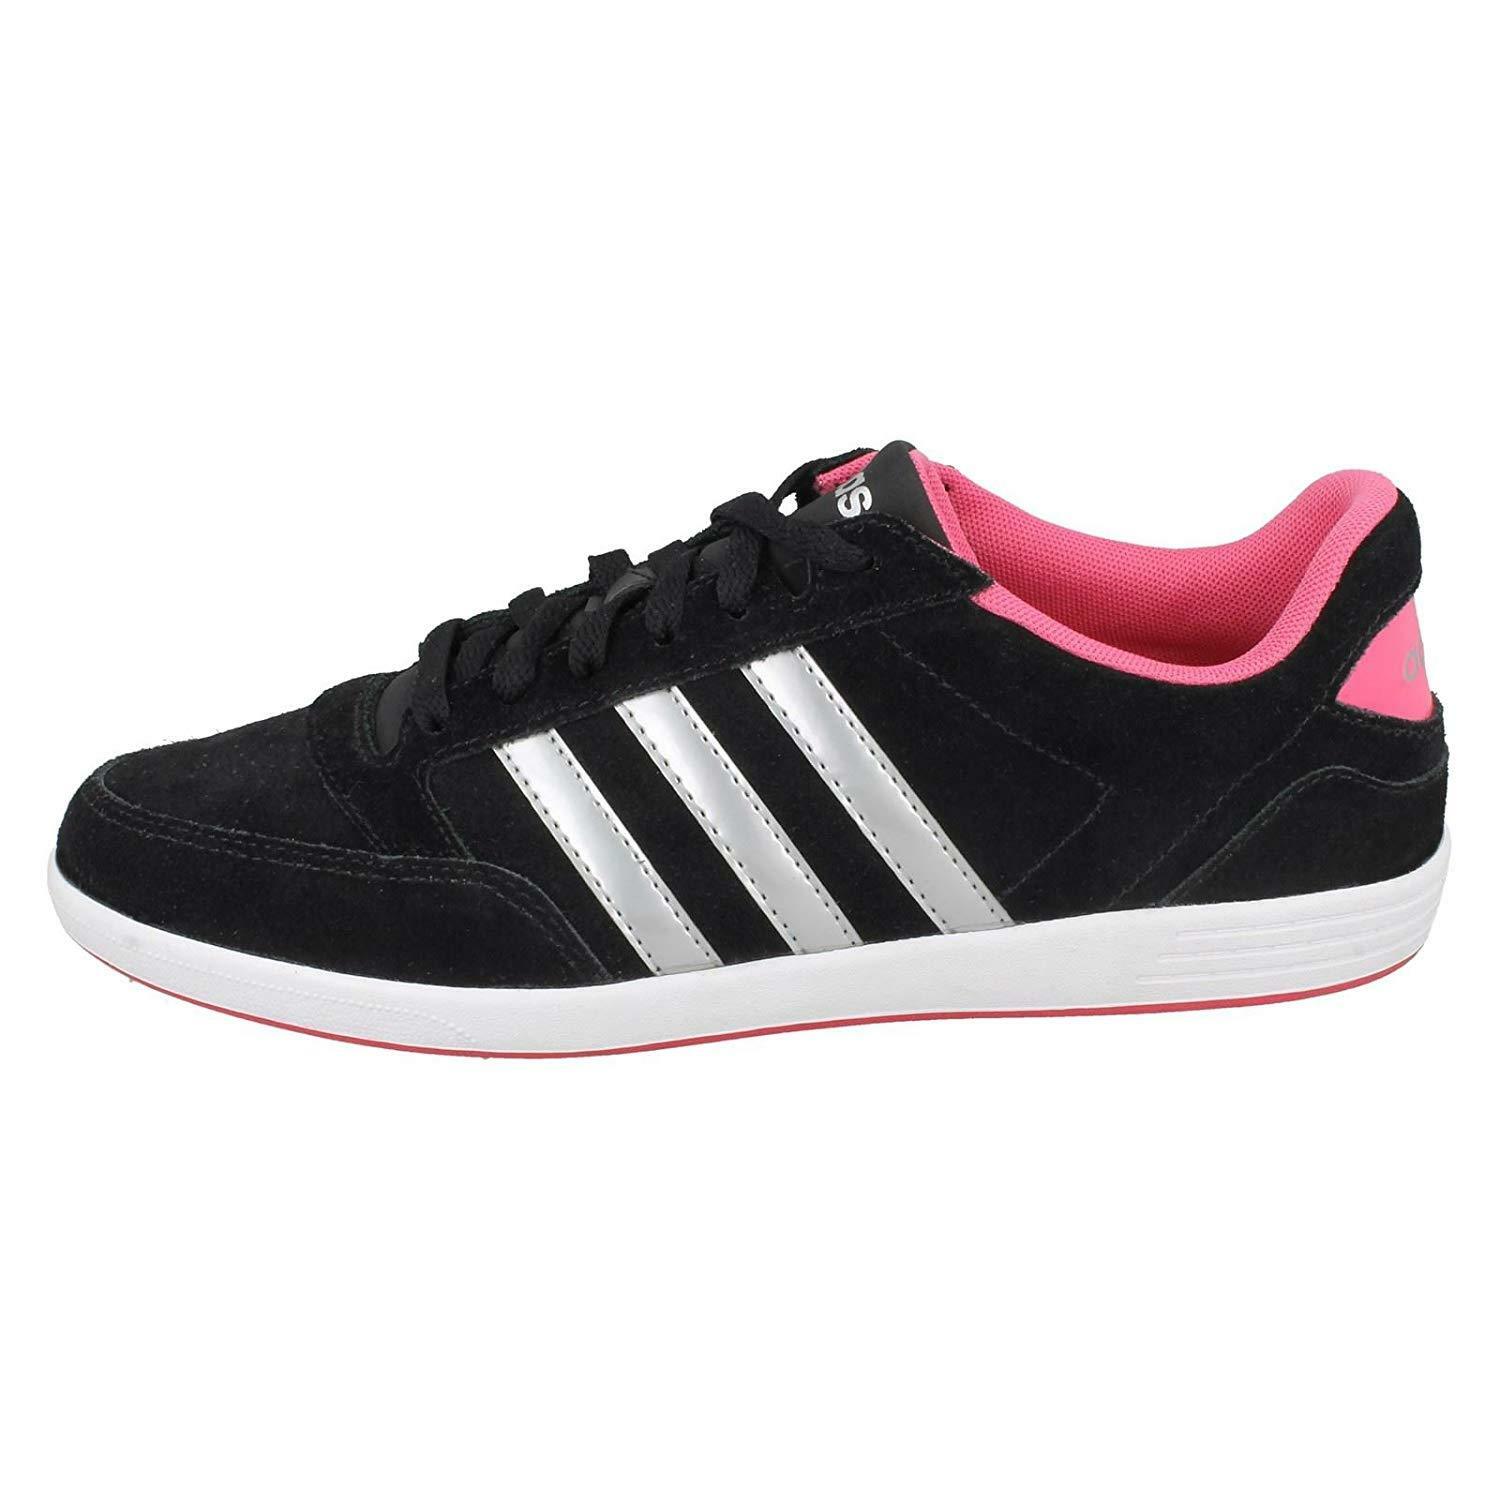 Adidas Neo Womens Hoops Black and Pink 